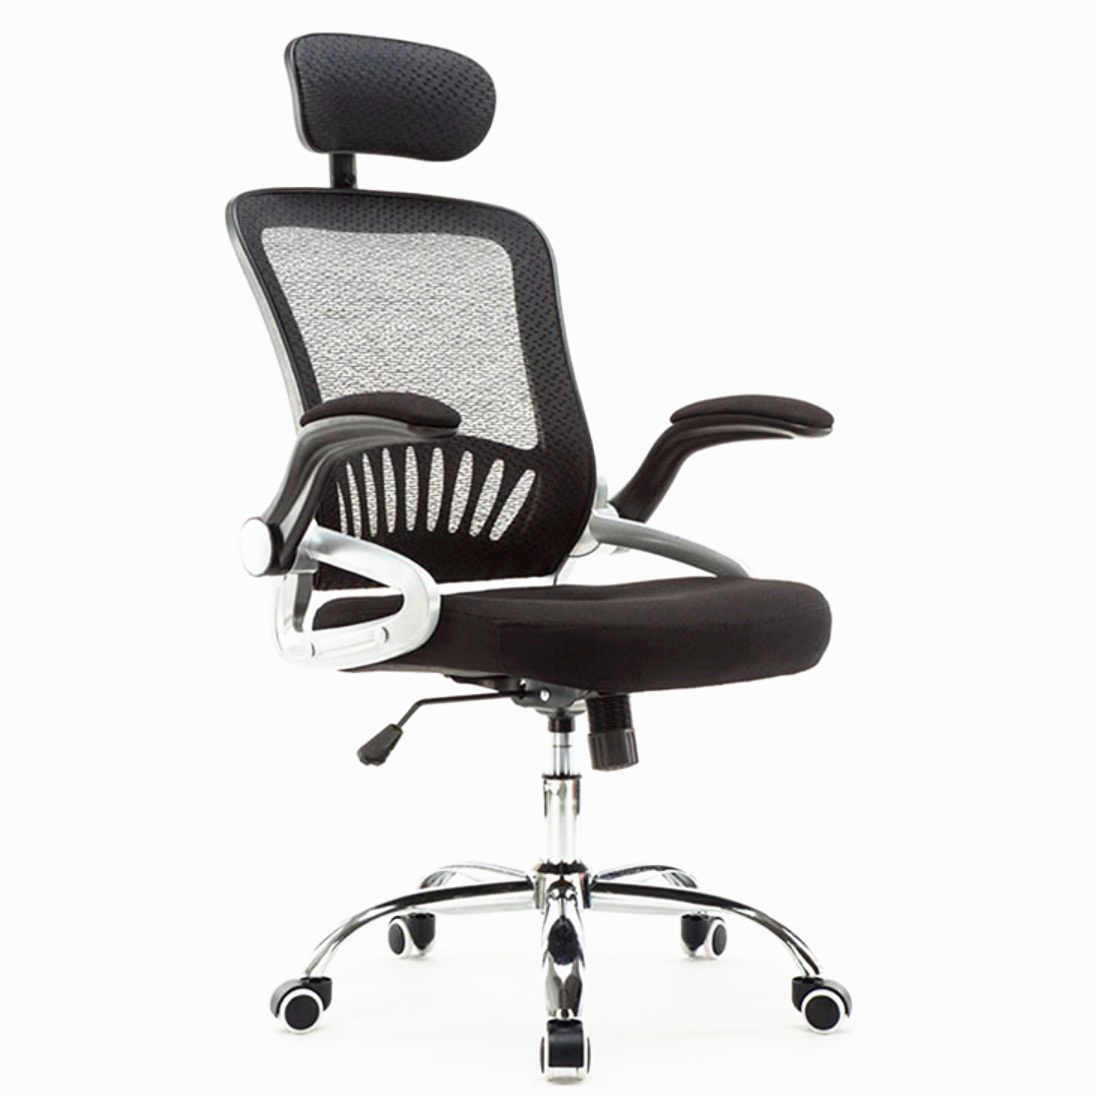 Model 5008 Ergonomic chair provides 4 supporting points office Featured Image